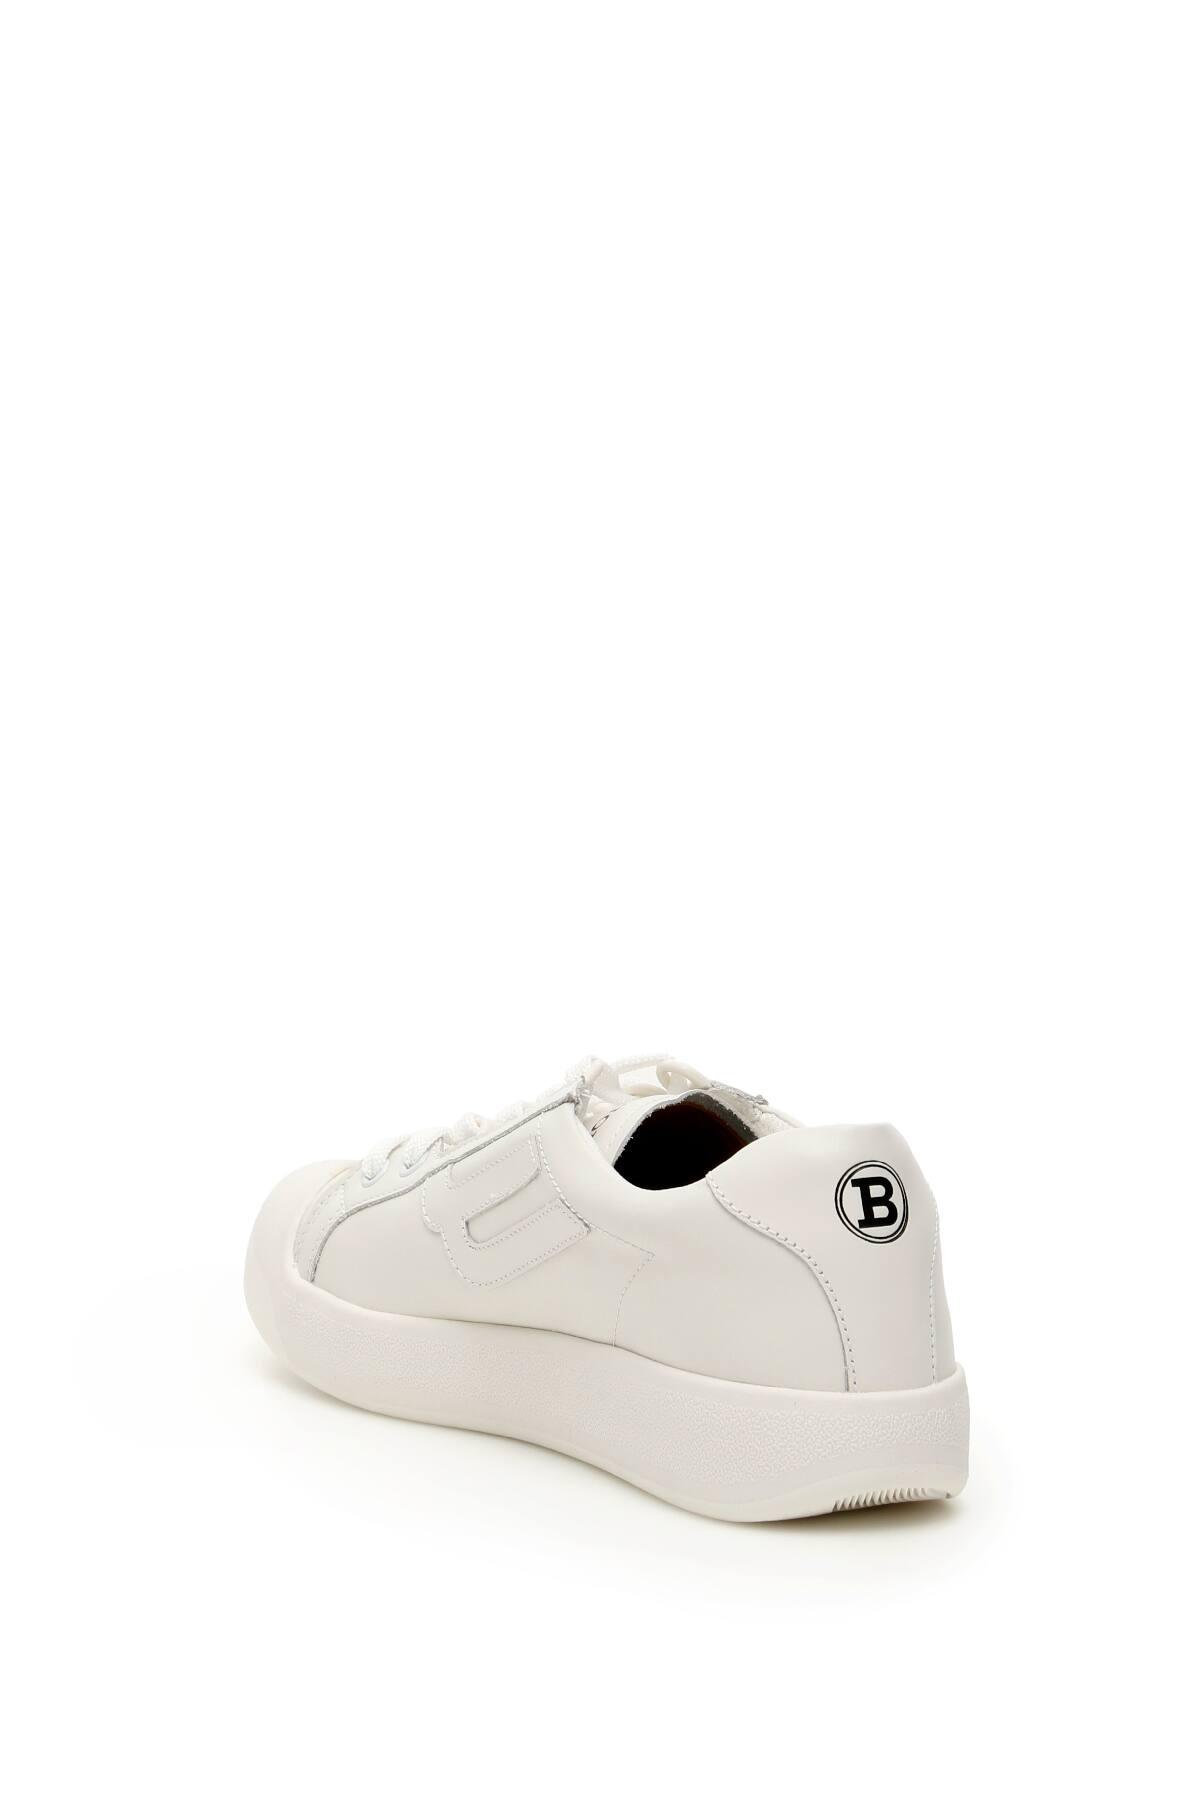 Bally Leather New Competition Sneakers in White - Lyst